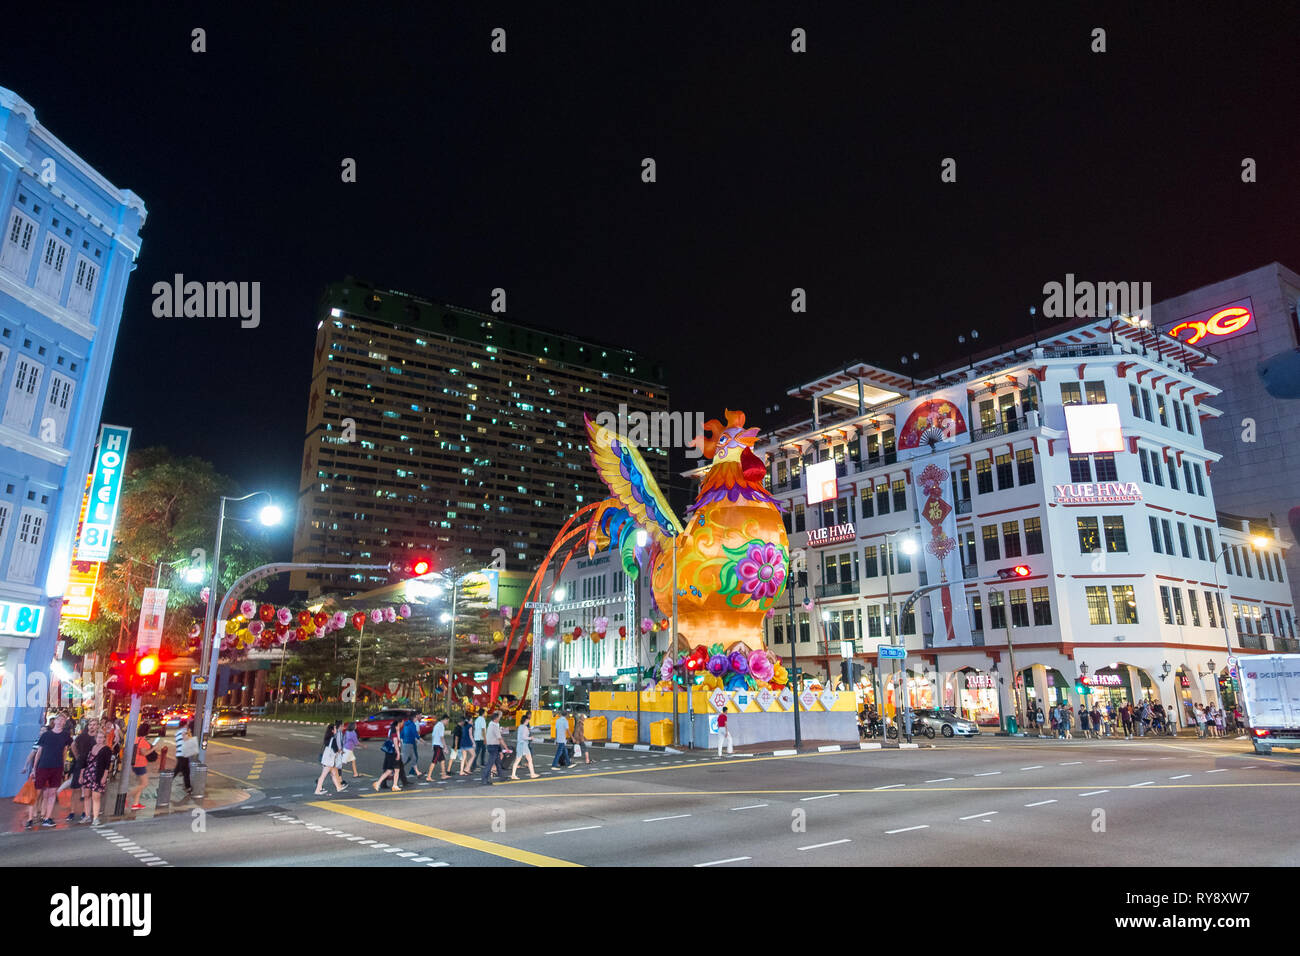 Pedestrians in crosswalk on Cross Street, With Giant Rooster Lantern -  Chinatown, Singapore Stock Photo